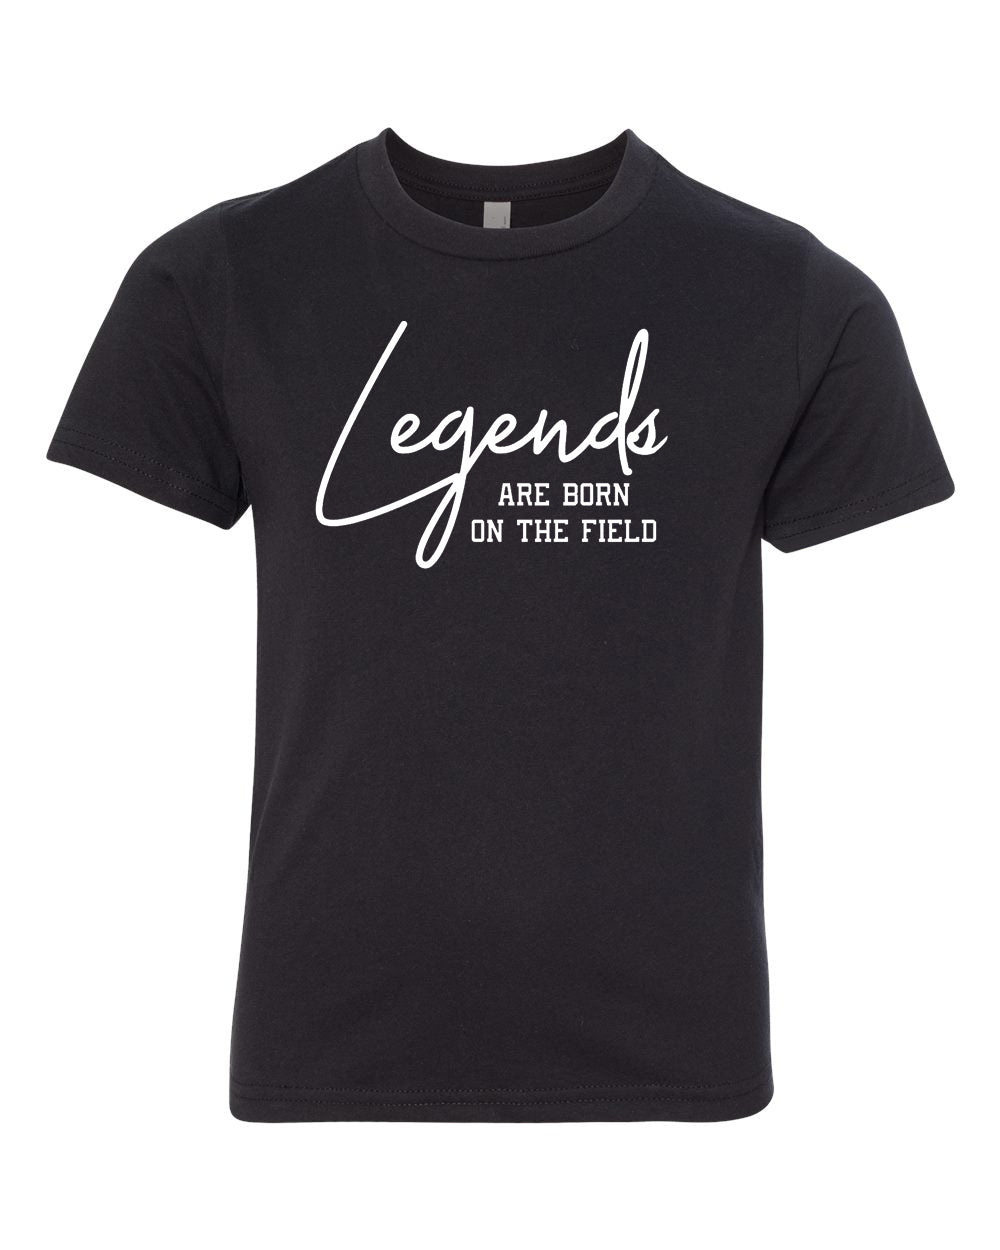 Legends Are Born On The Field Adult T-Shirt